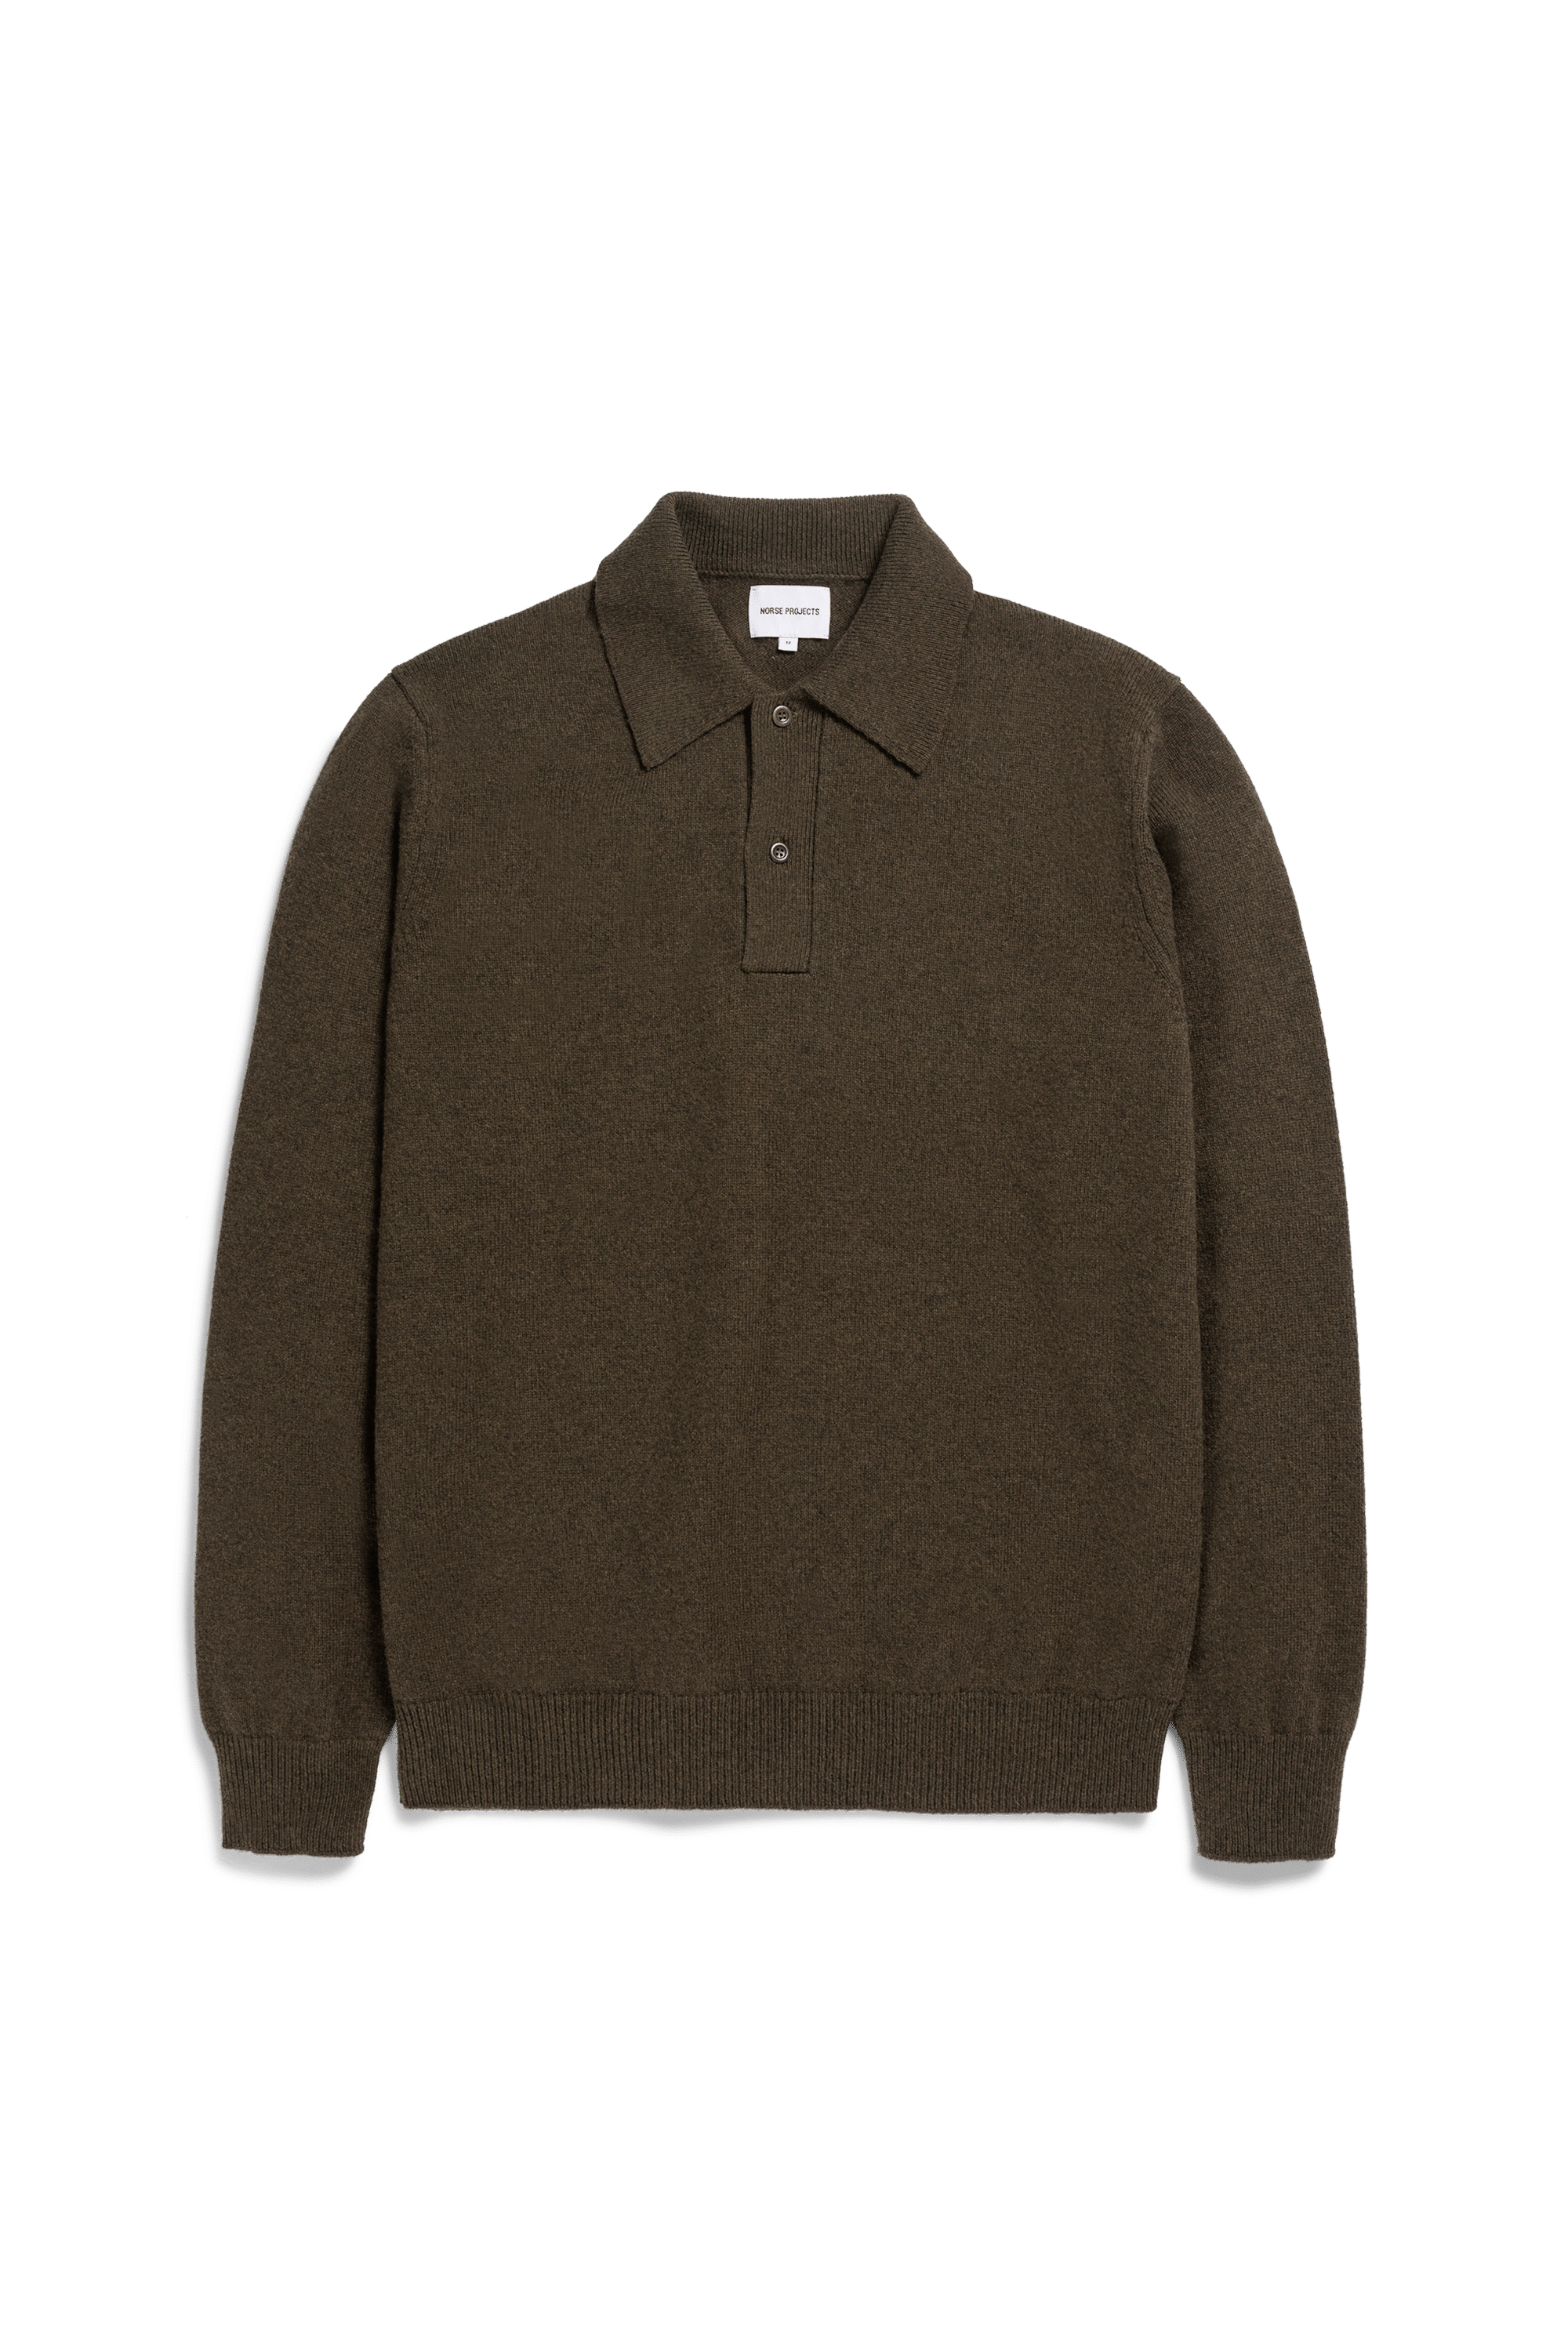 NORSE PROJECTS Marco Merino Lambswool Polo - Truffle